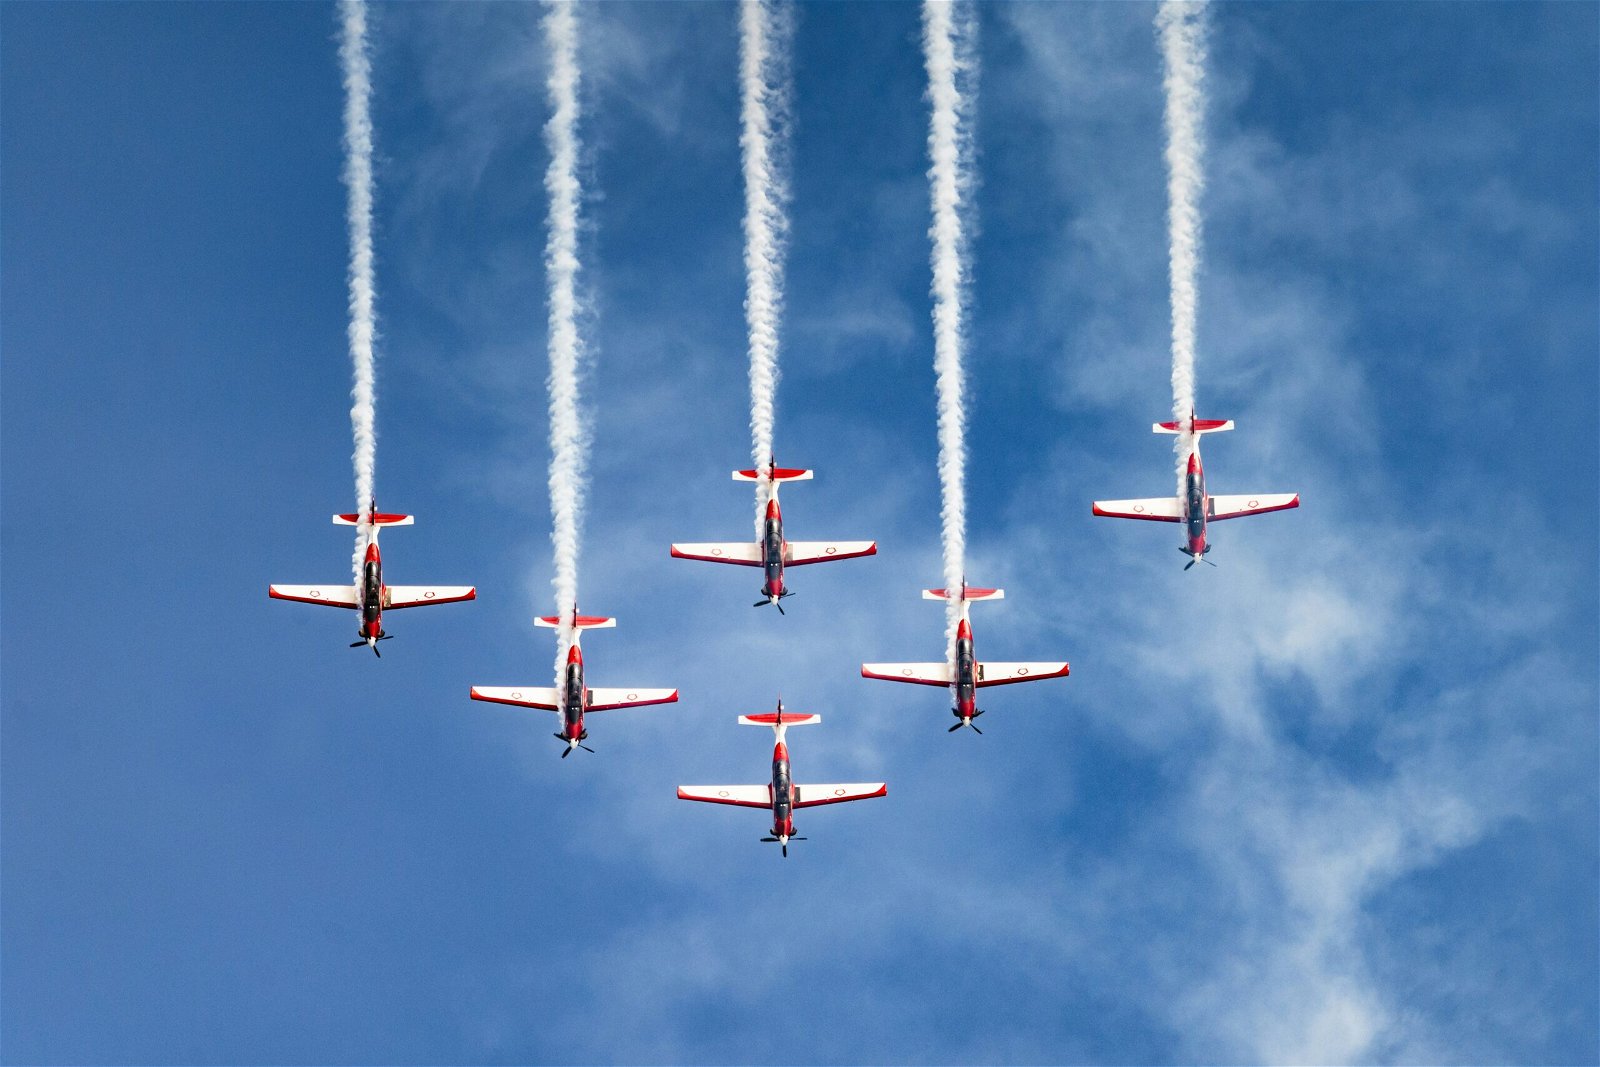 Six airplanes with white smoke trails flying against a blue sky at an air show as an example of sports photography